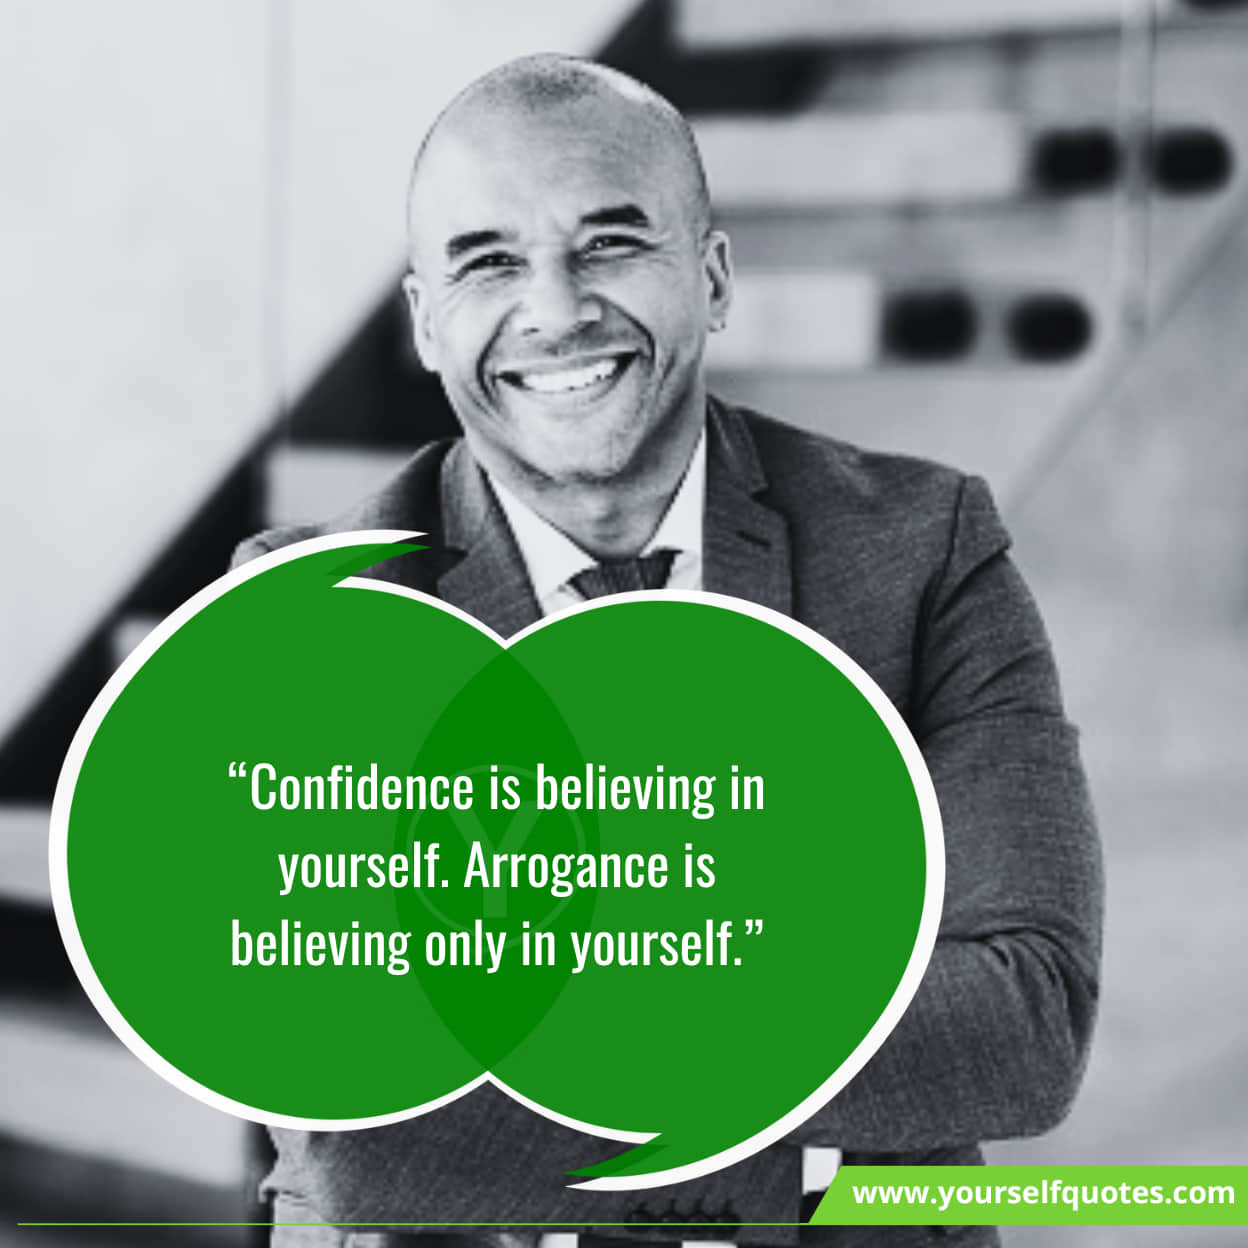 Best Famous Quotes About Being Self-Confident